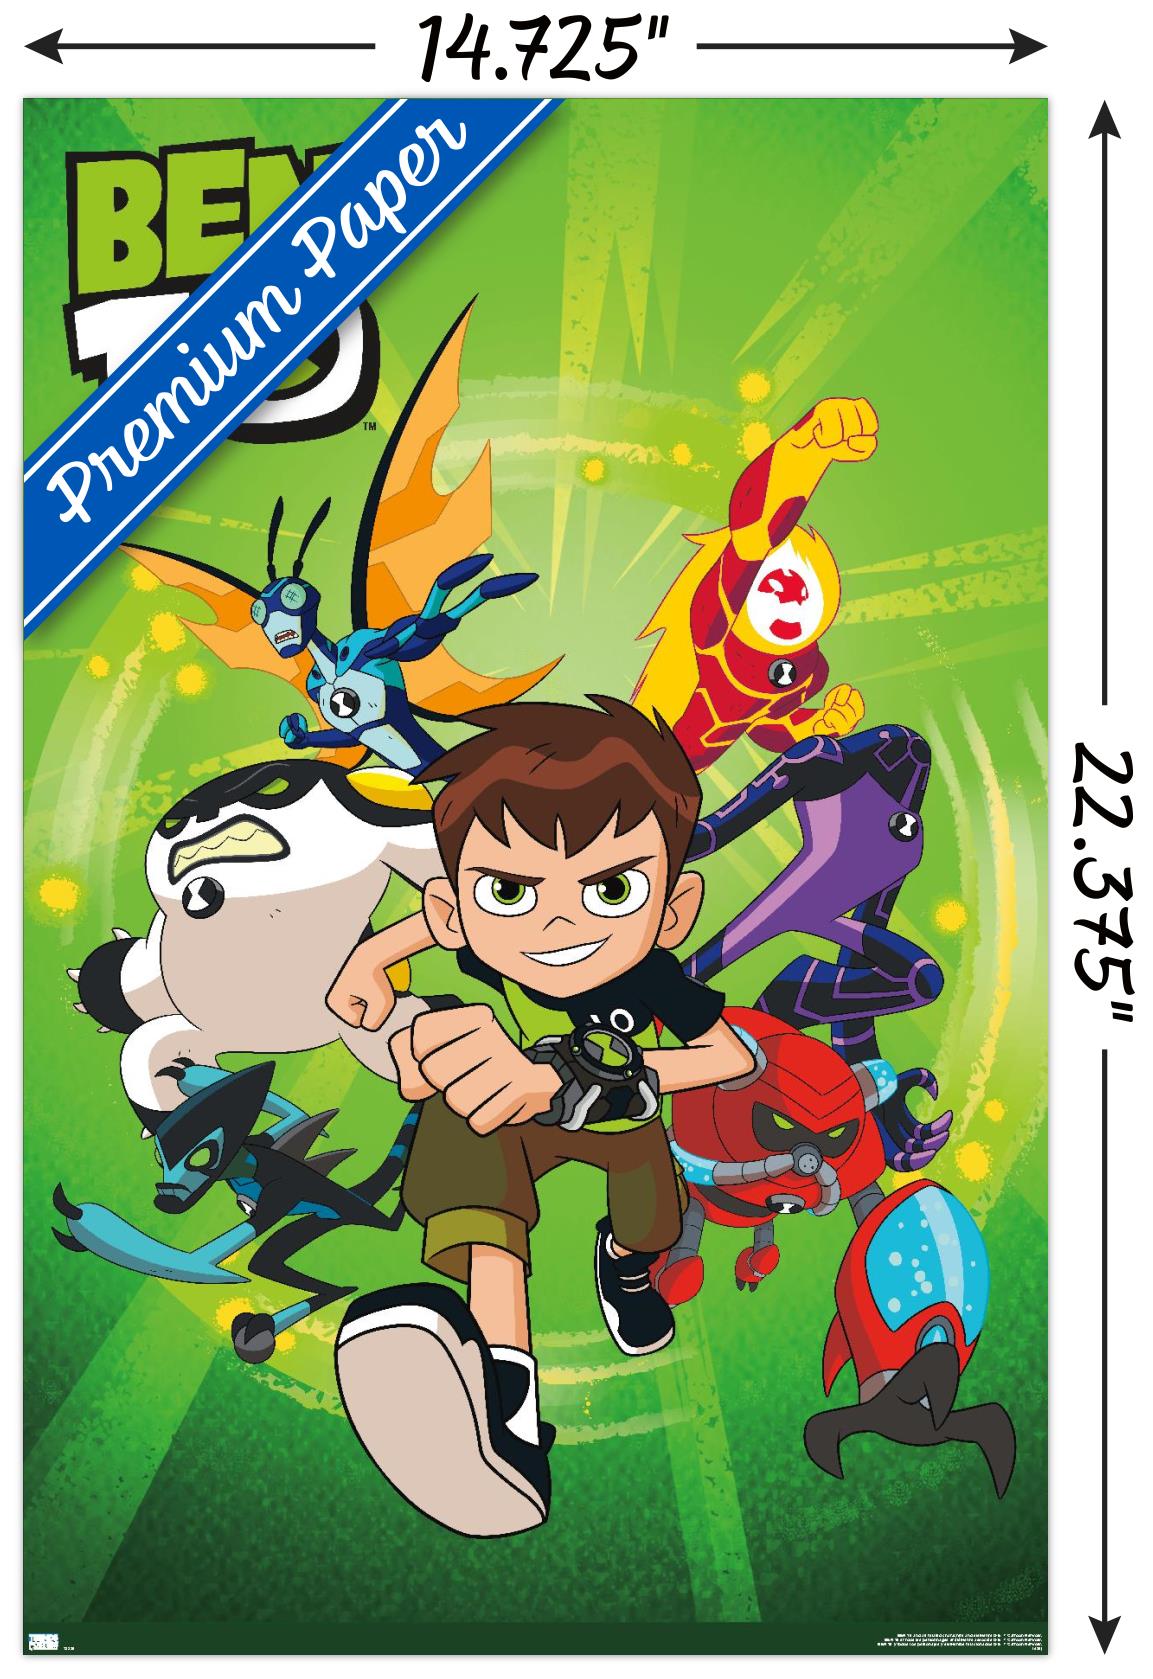 Ben 10 - Group Wall Poster, 14.725" x 22.375" - image 3 of 3